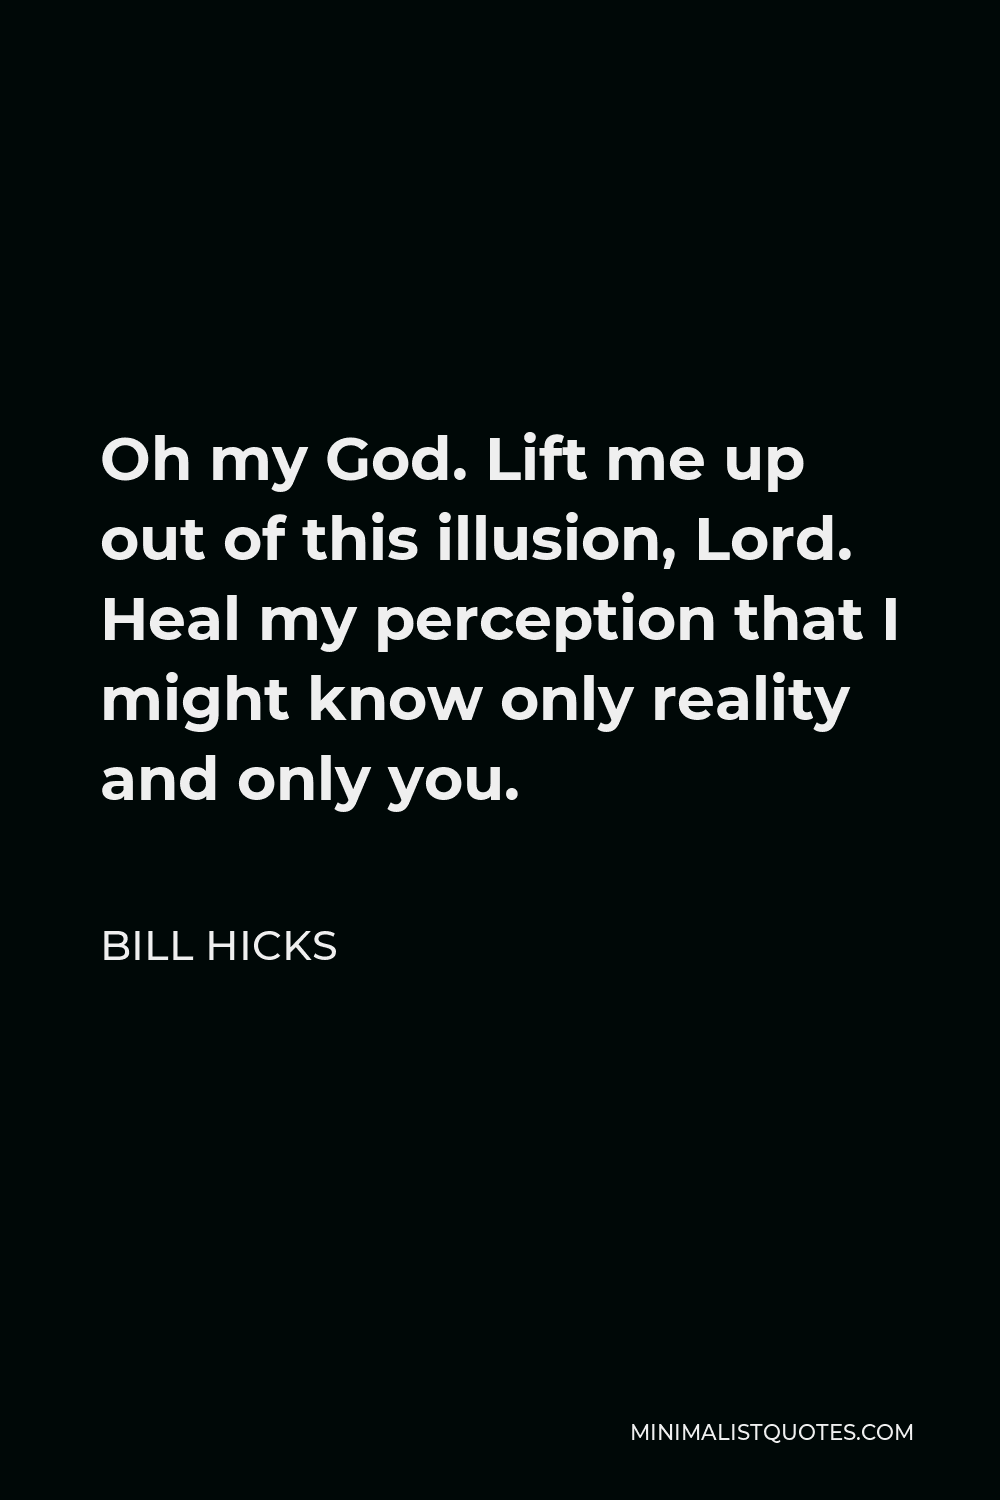 Bill Hicks Quote - Oh my God. Lift me up out of this illusion, Lord. Heal my perception that I might know only reality and only you.